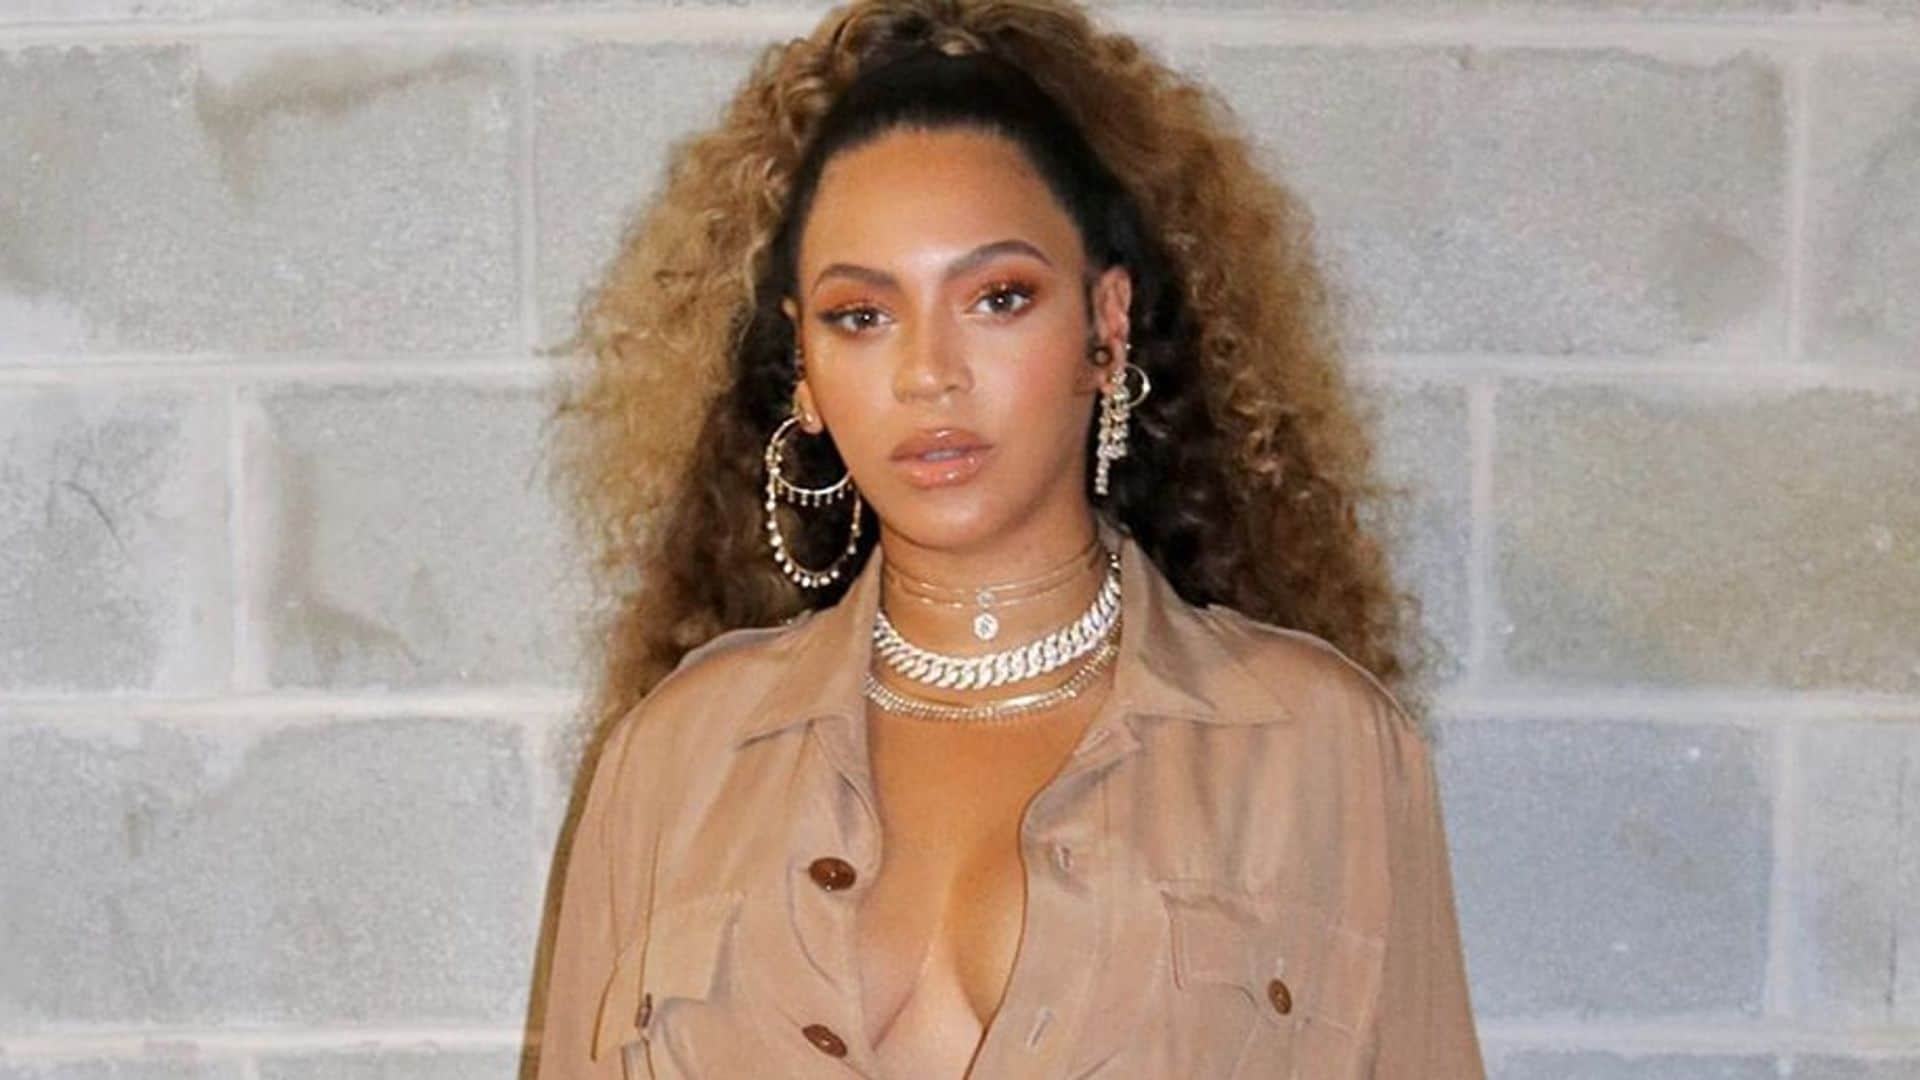 Fans suspect Beyoncé is hiding something in these photos